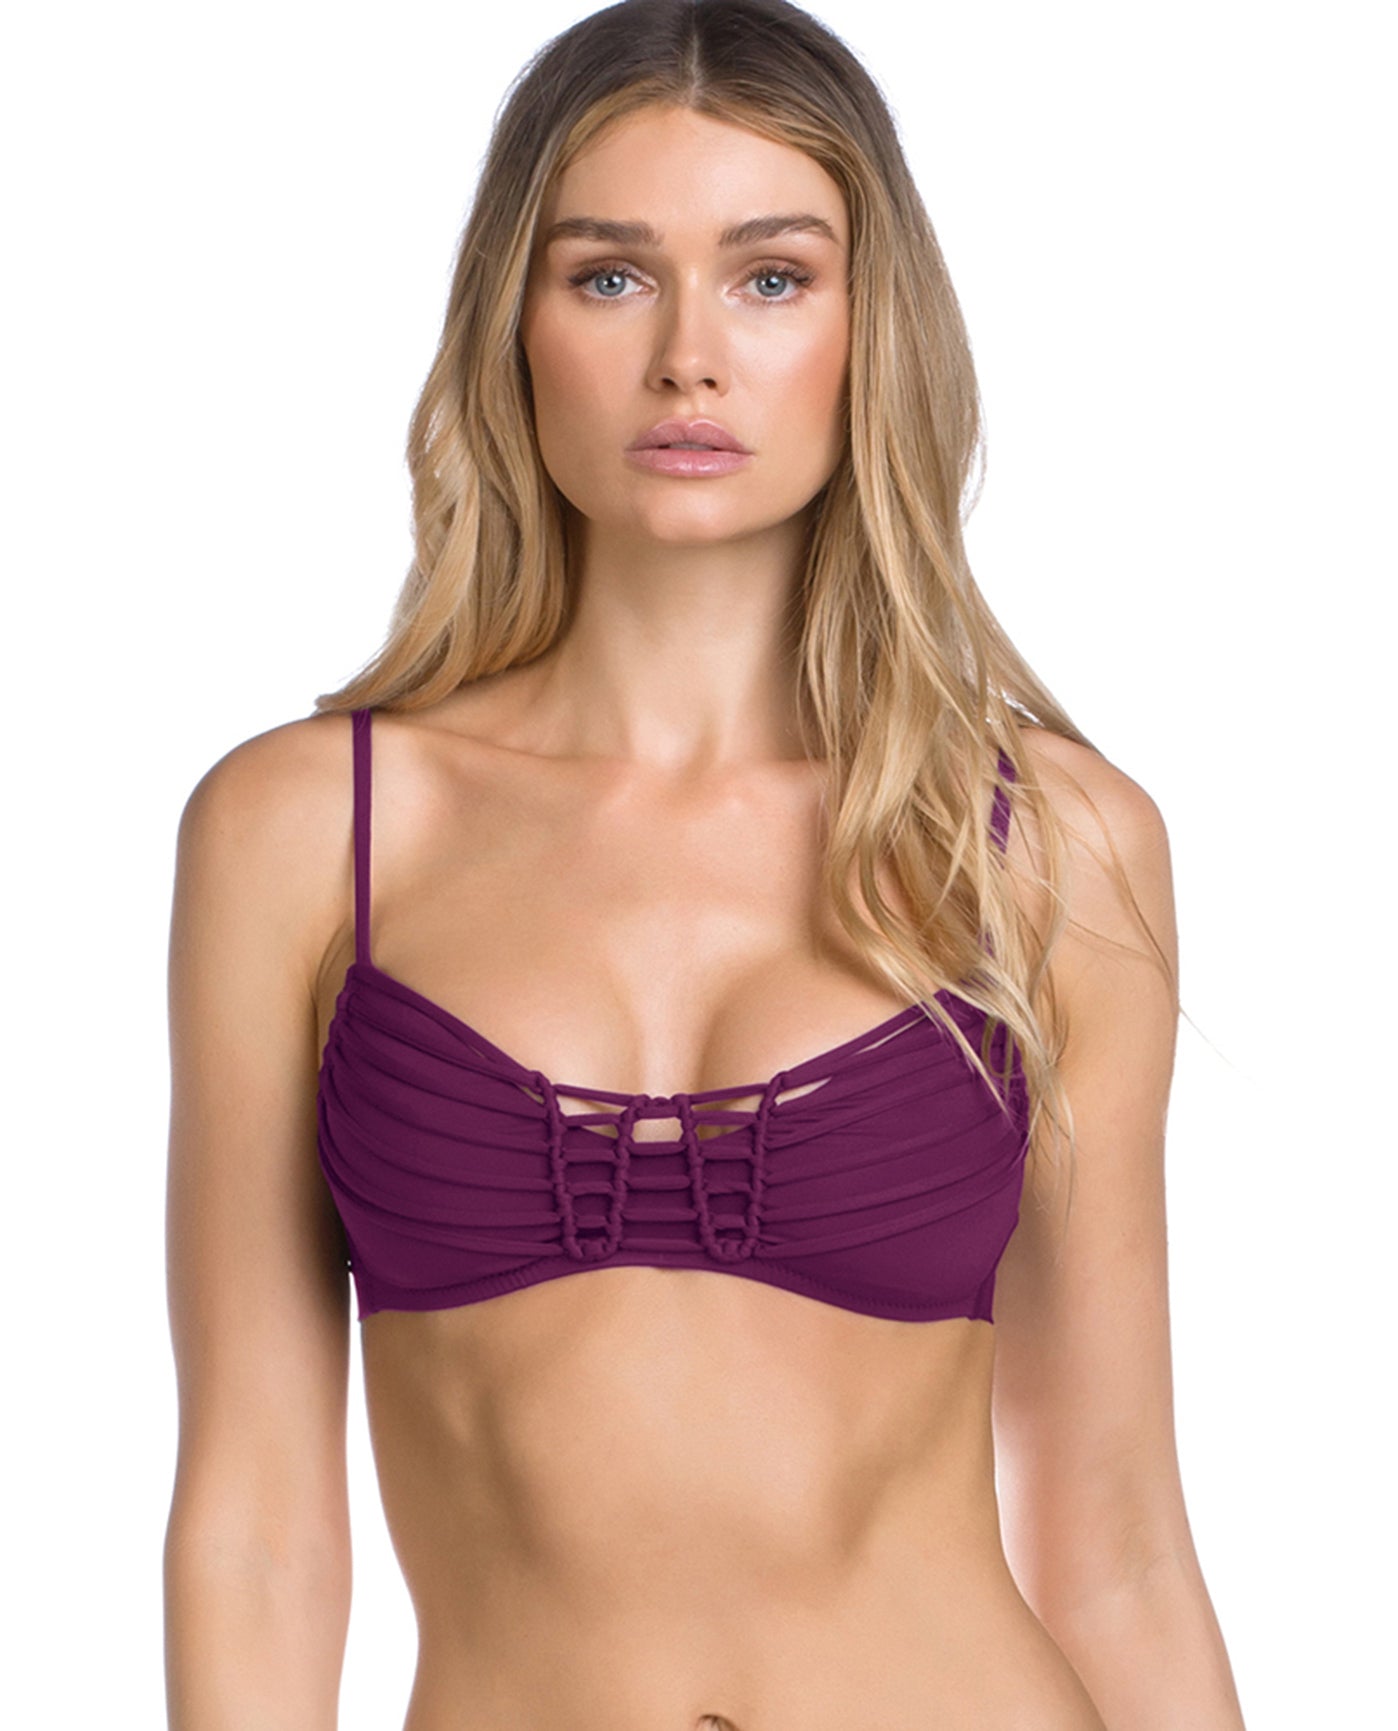 Front View Of Becca by Rebecca Virtue No Strings Attached Macrame Bralette Bikini Top | BEC No Strings Attached Raisin